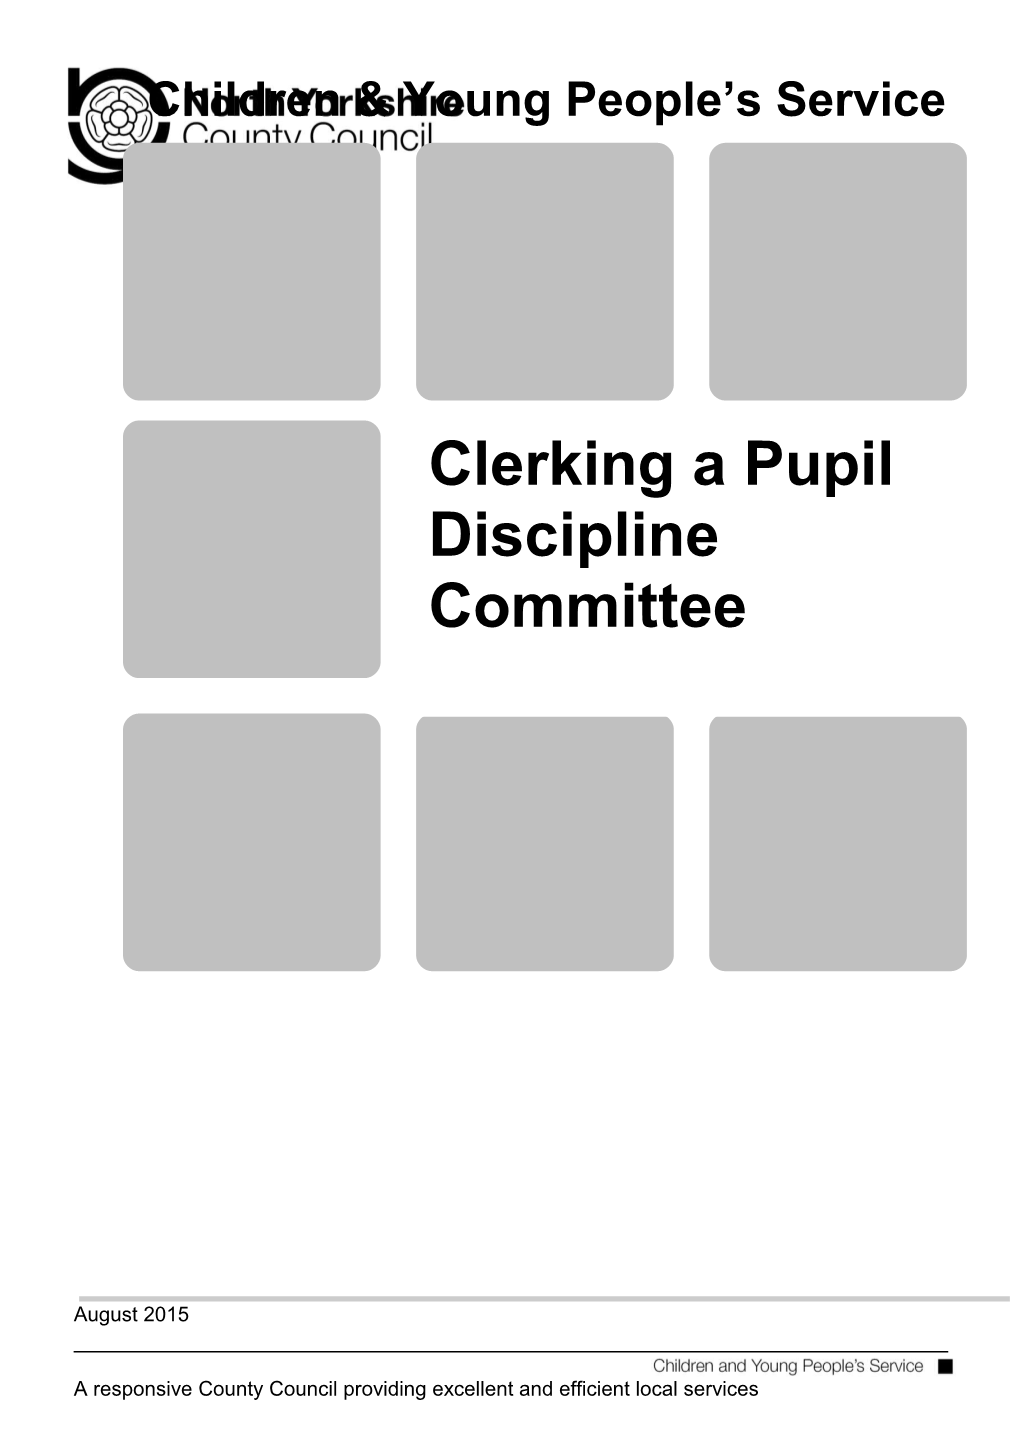 Agenda for the Pupil Discipline Committee